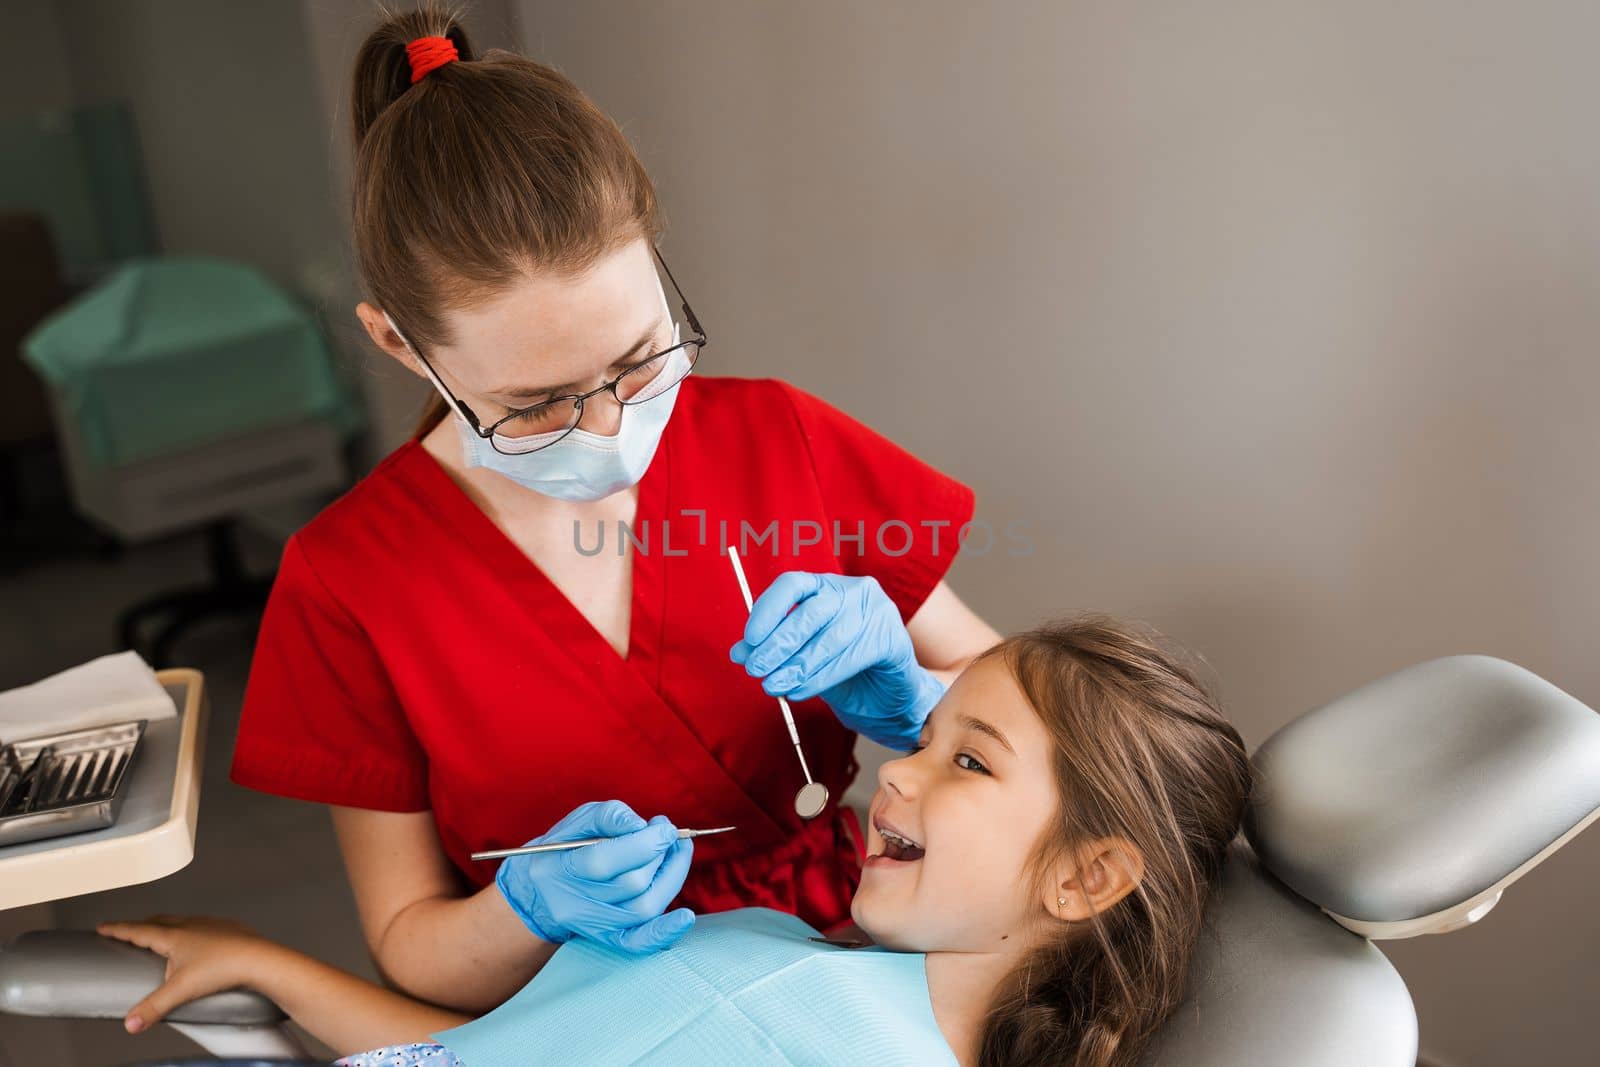 Cheerful child girl smiling at dentists consultation in dentistry. Dental diseases. Consultation with pediatric dentist for treatment of toothache in child